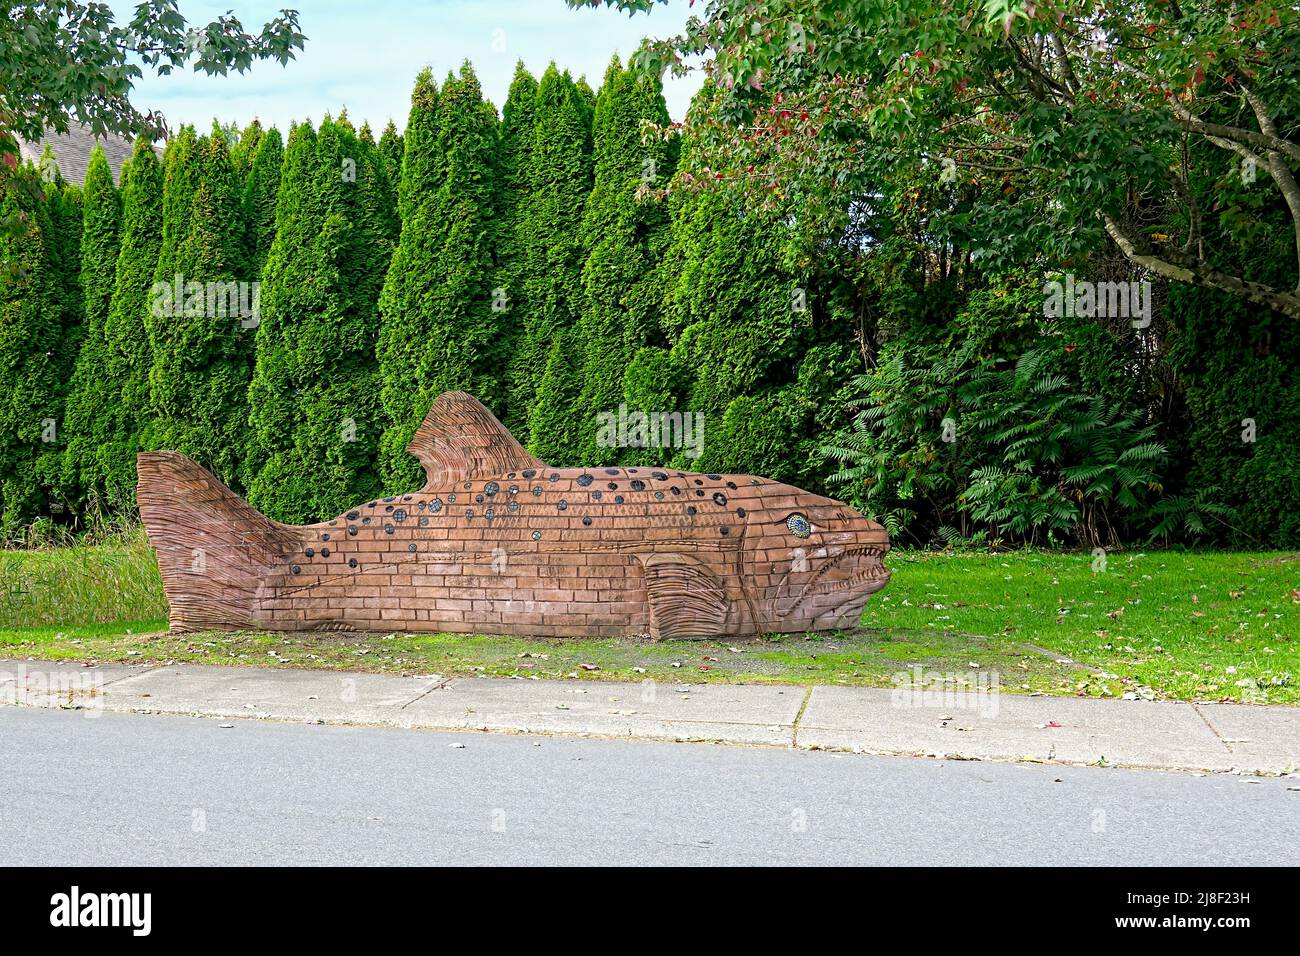 Carved wooden salmon at Fishtrap Creek Park, Abbotsford, B. C., Canada. Stock Photo